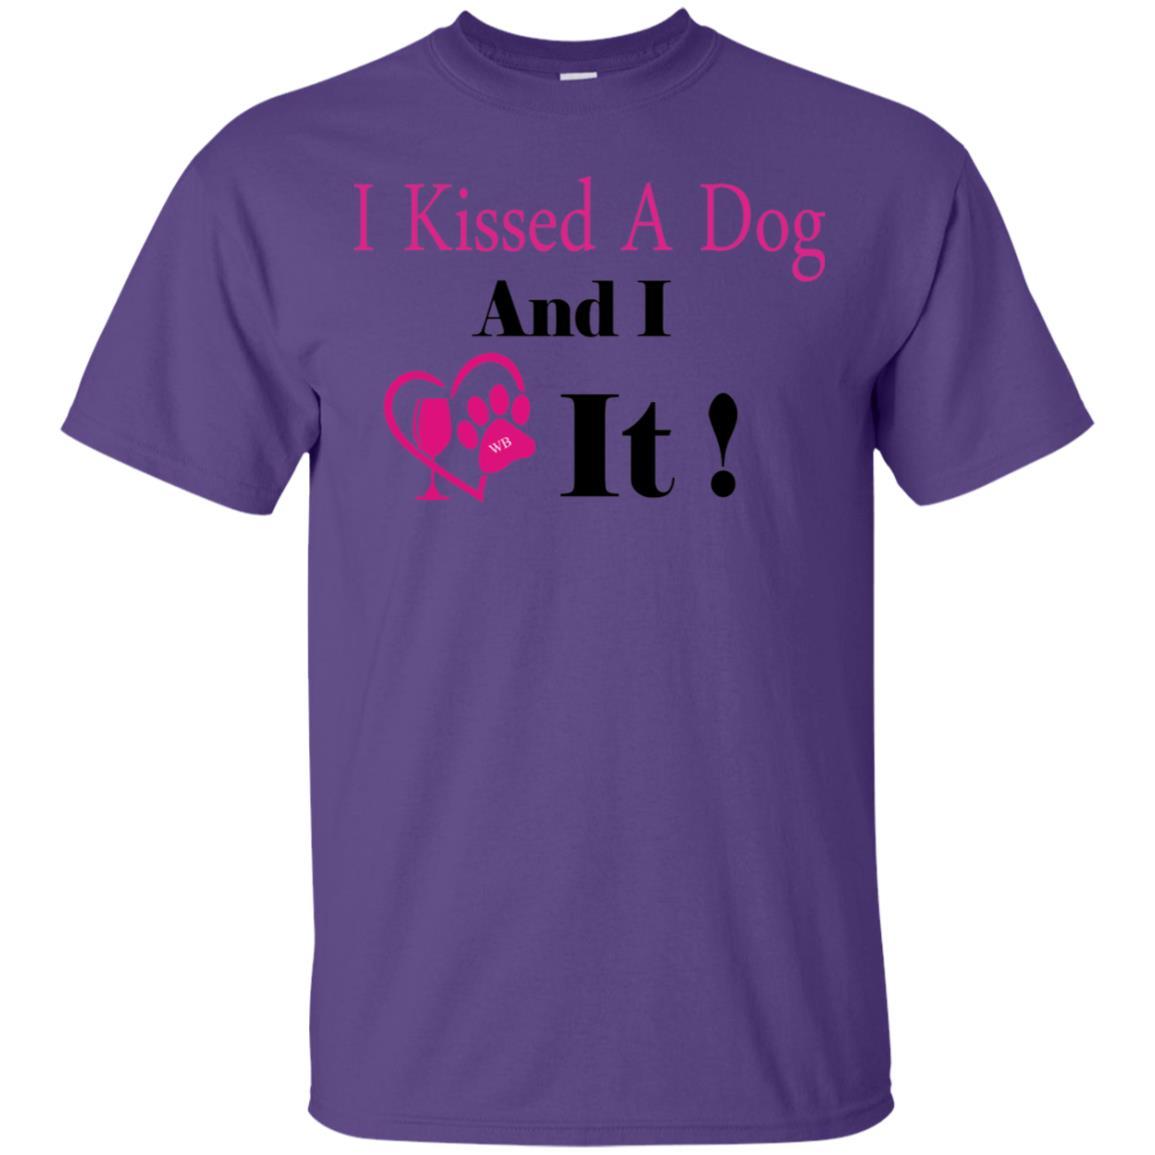 T-Shirts Purple / S WineyBitches.co "I Kissed A Dog And I Loved It:" Ultra Cotton T-Shirt WineyBitchesCo